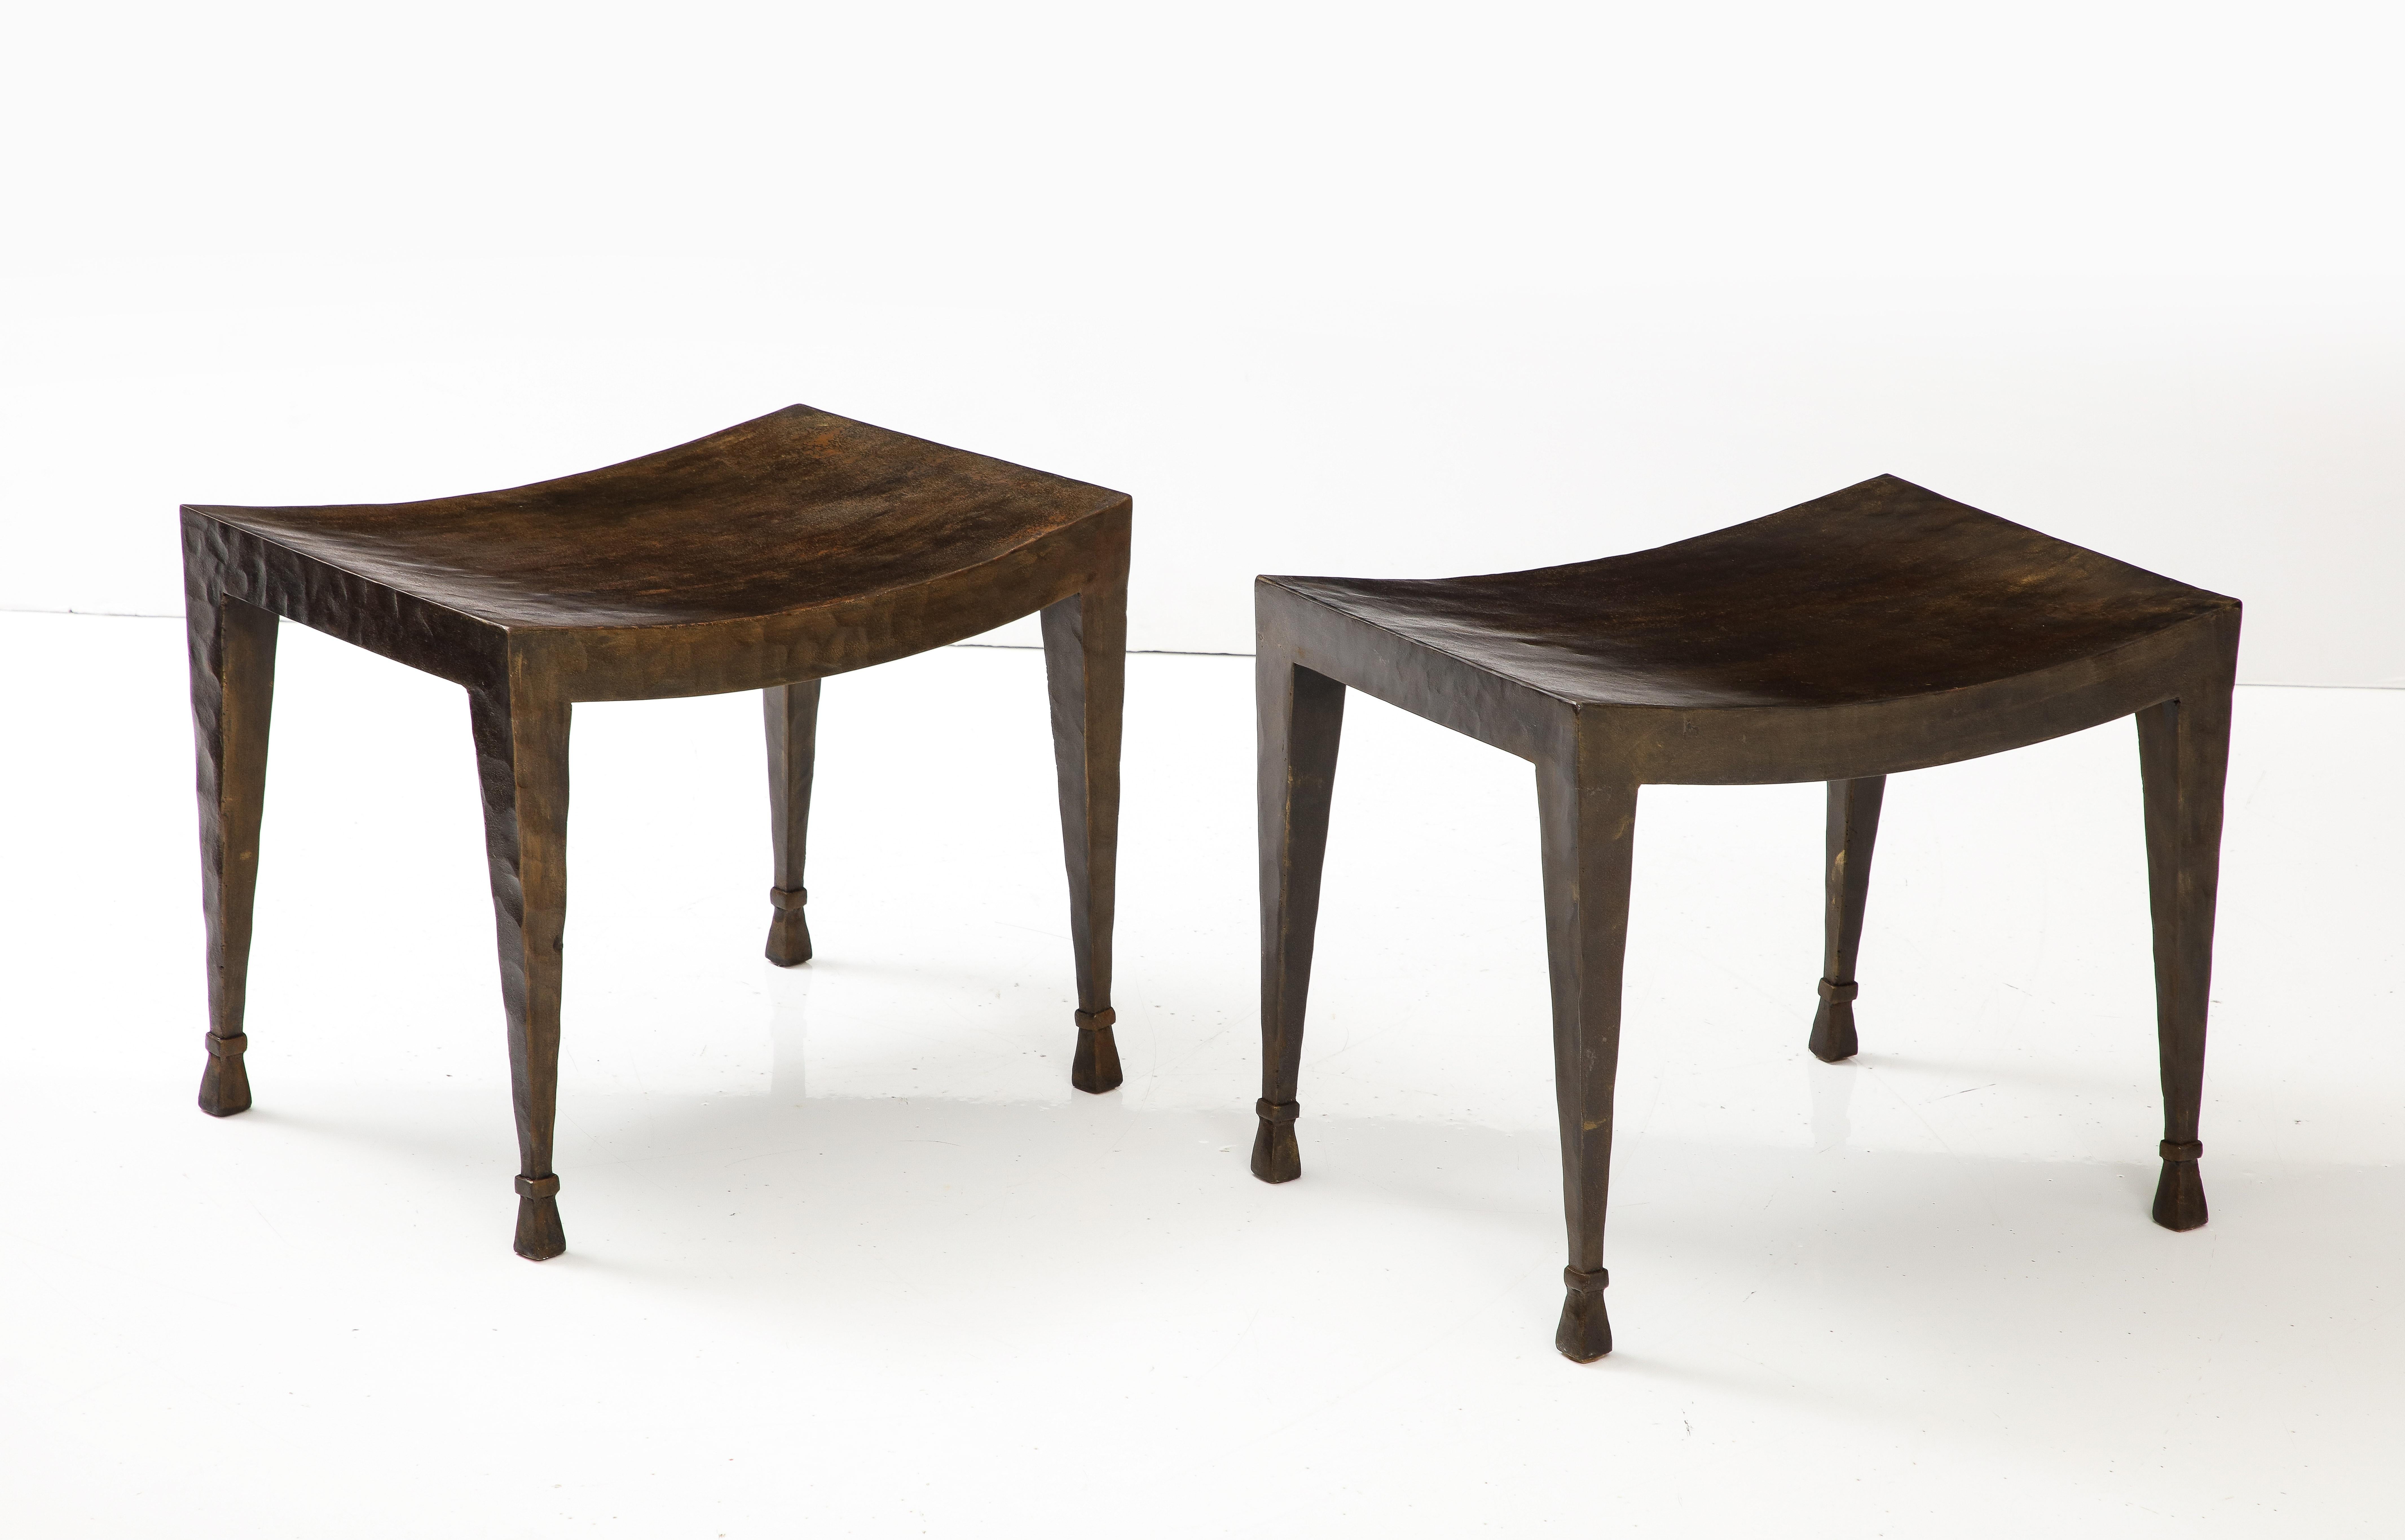 A fine pair of patinated steel benches with a 